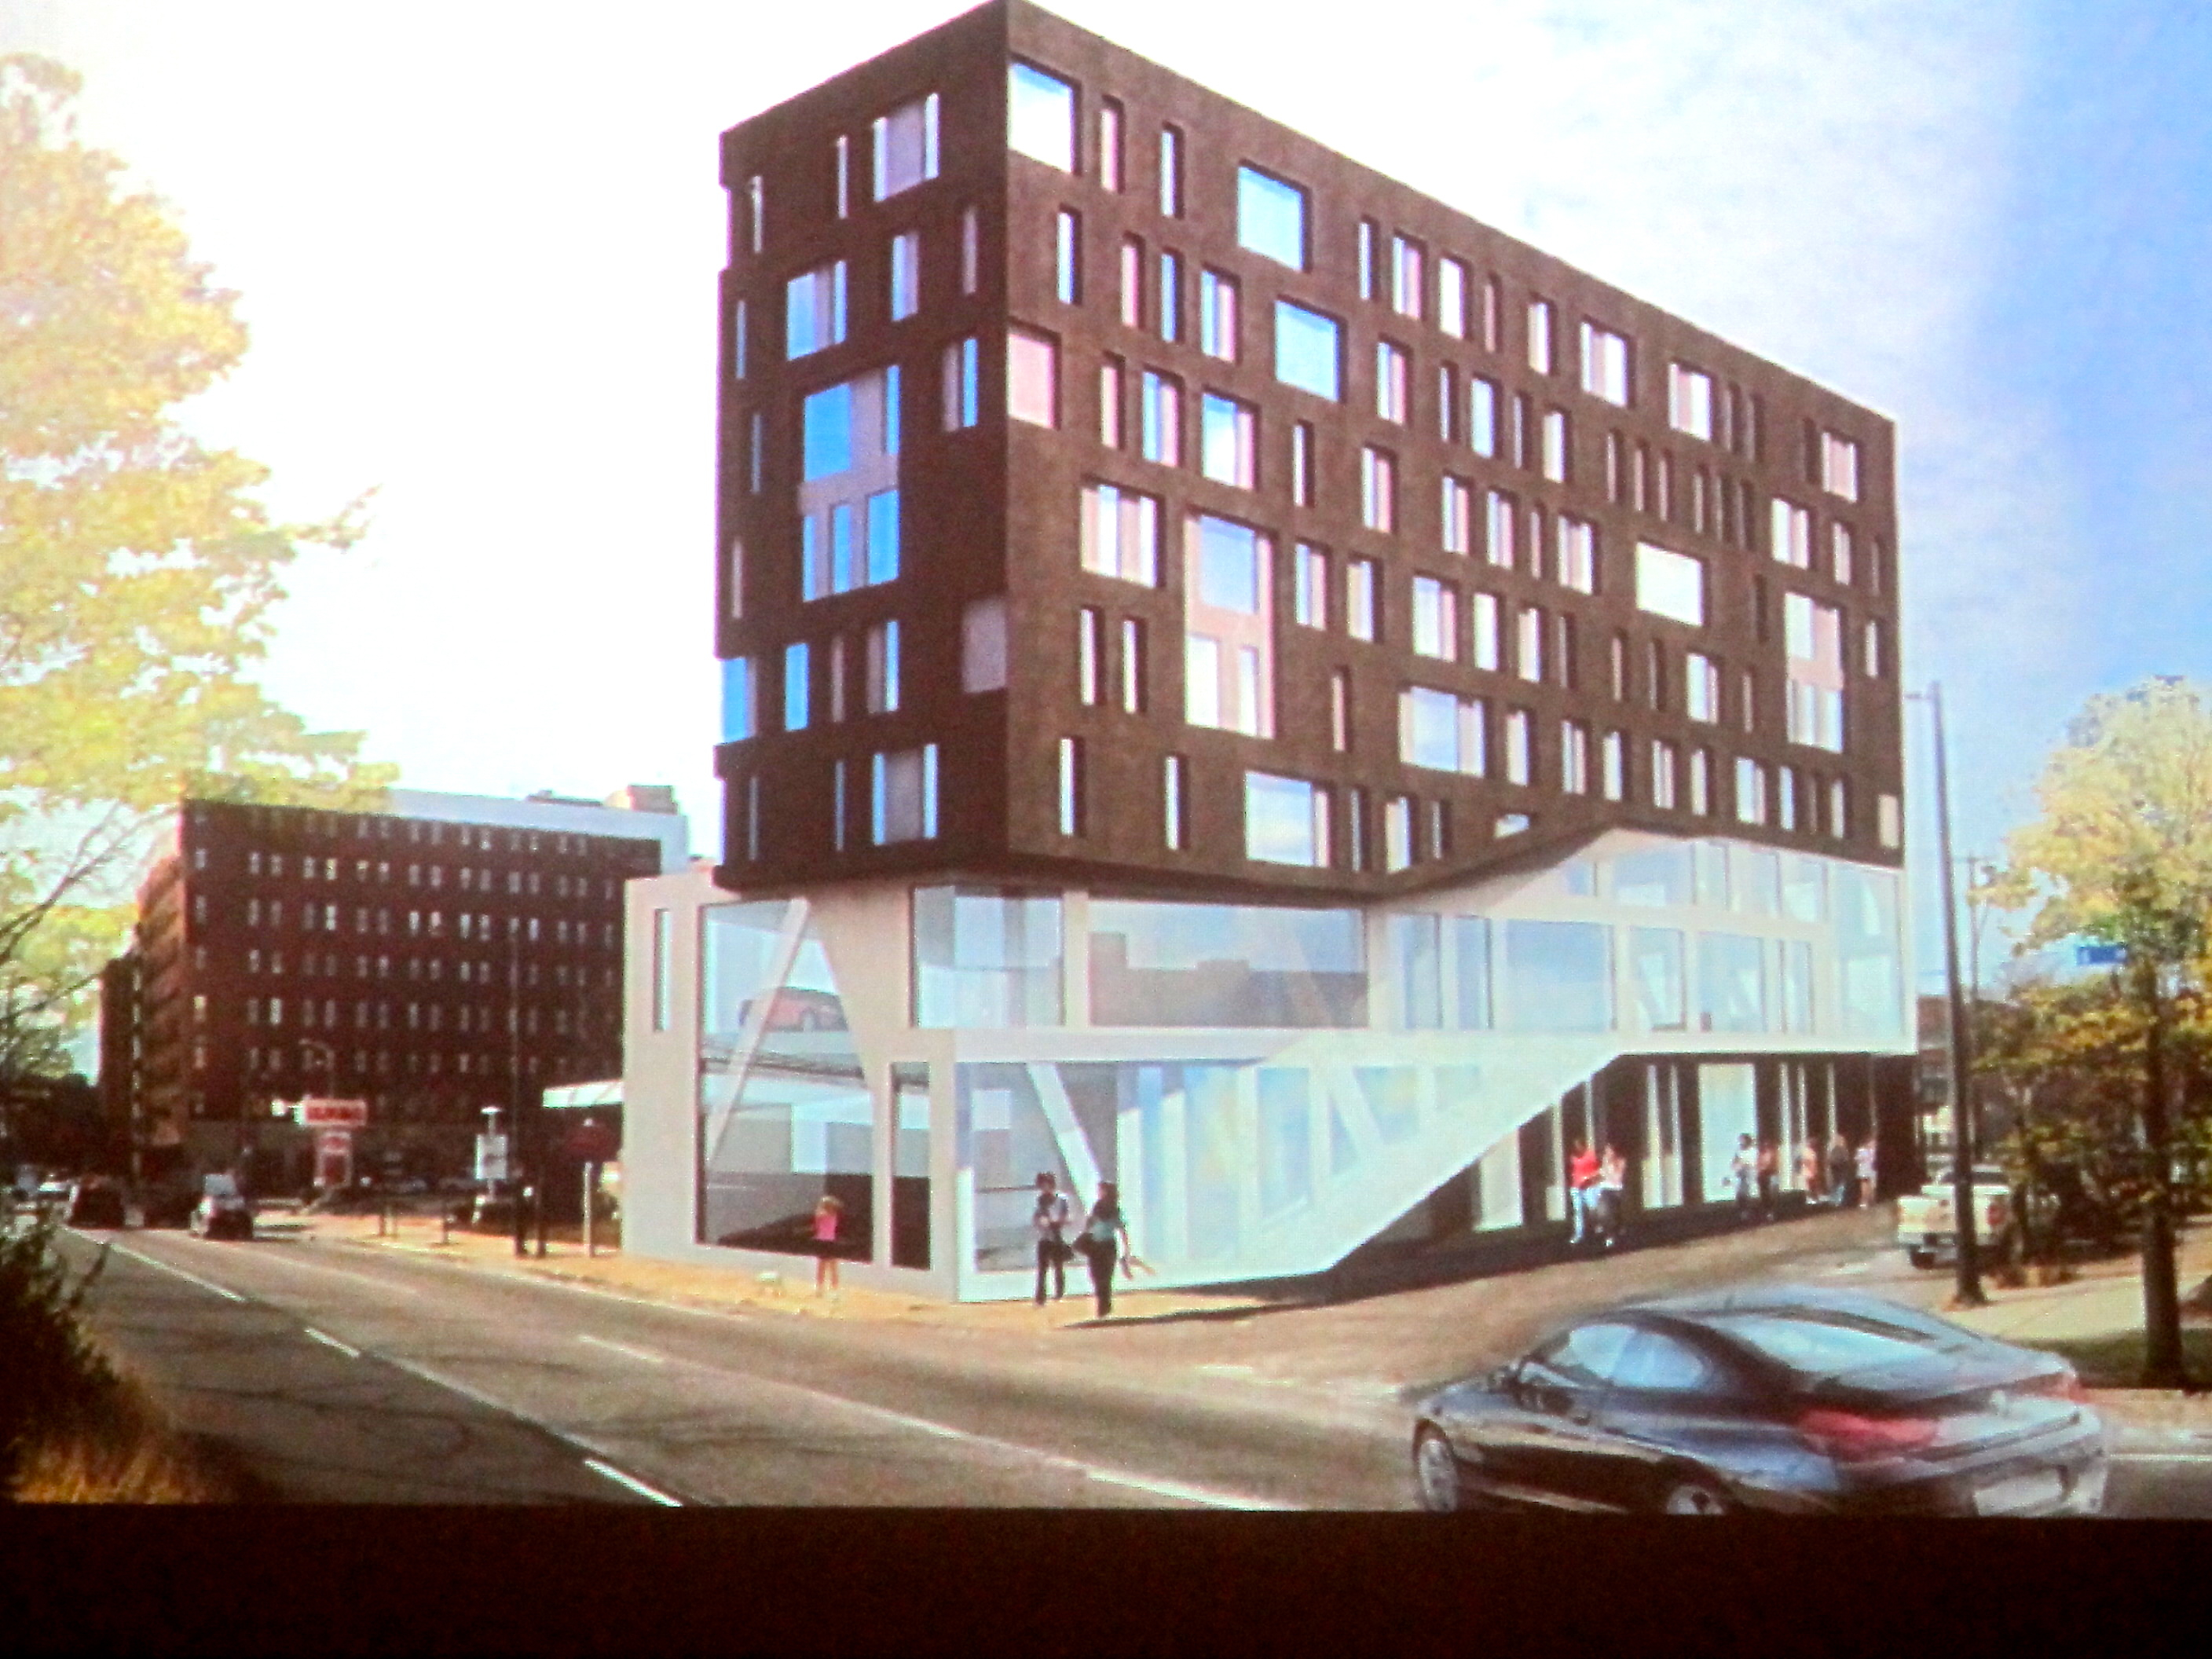 Rendering of proposed Desimone mixed use project on N. Delaware Ave.